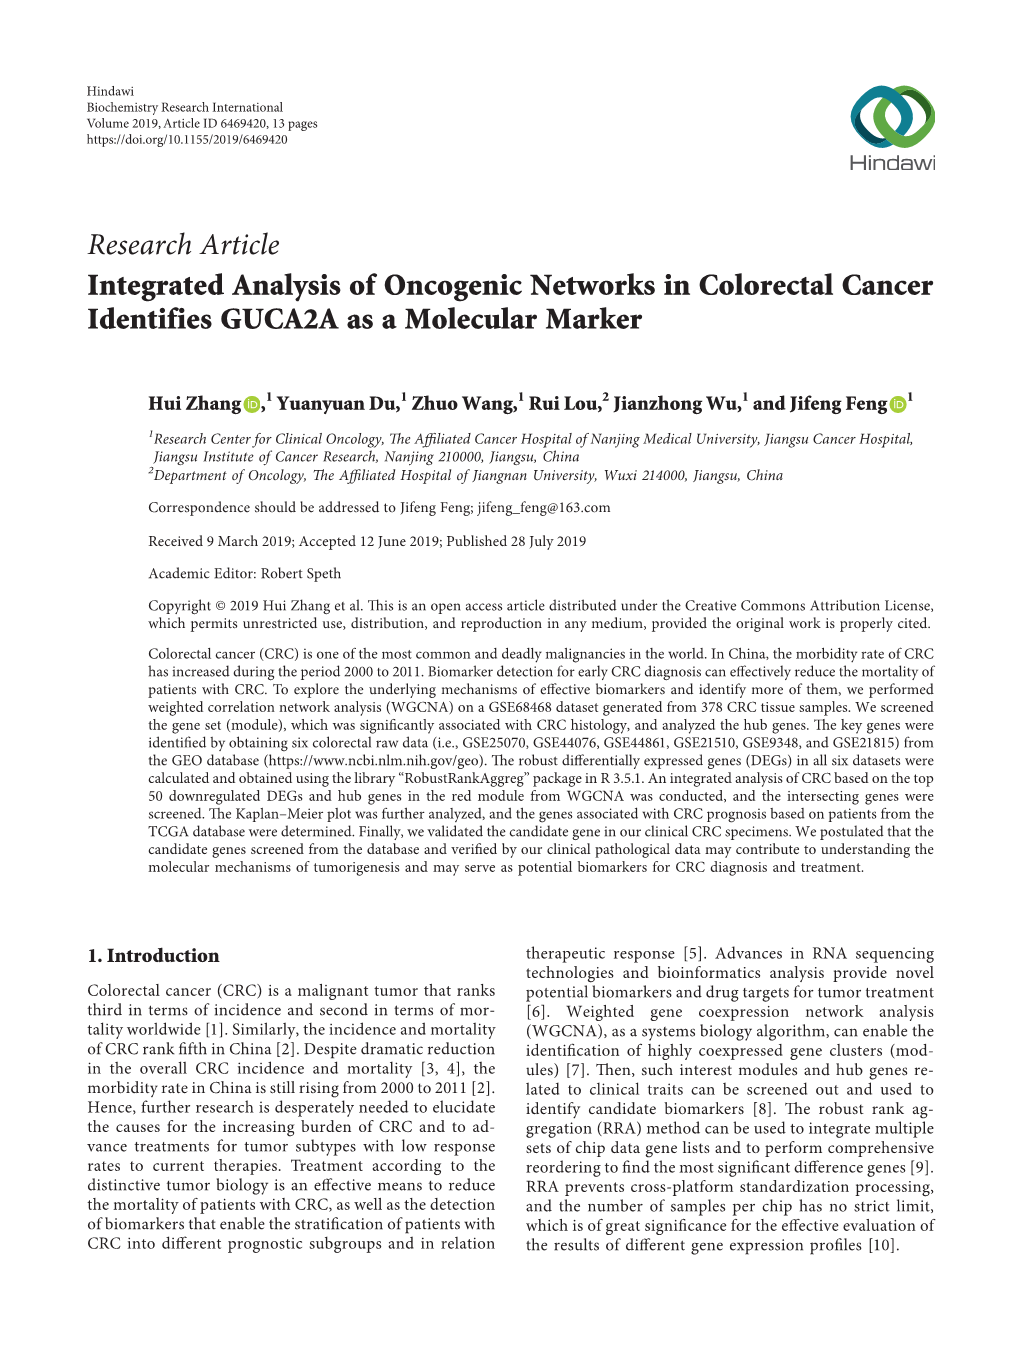 Integrated Analysis of Oncogenic Networks in Colorectal Cancer Identifies GUCA2A As a Molecular Marker